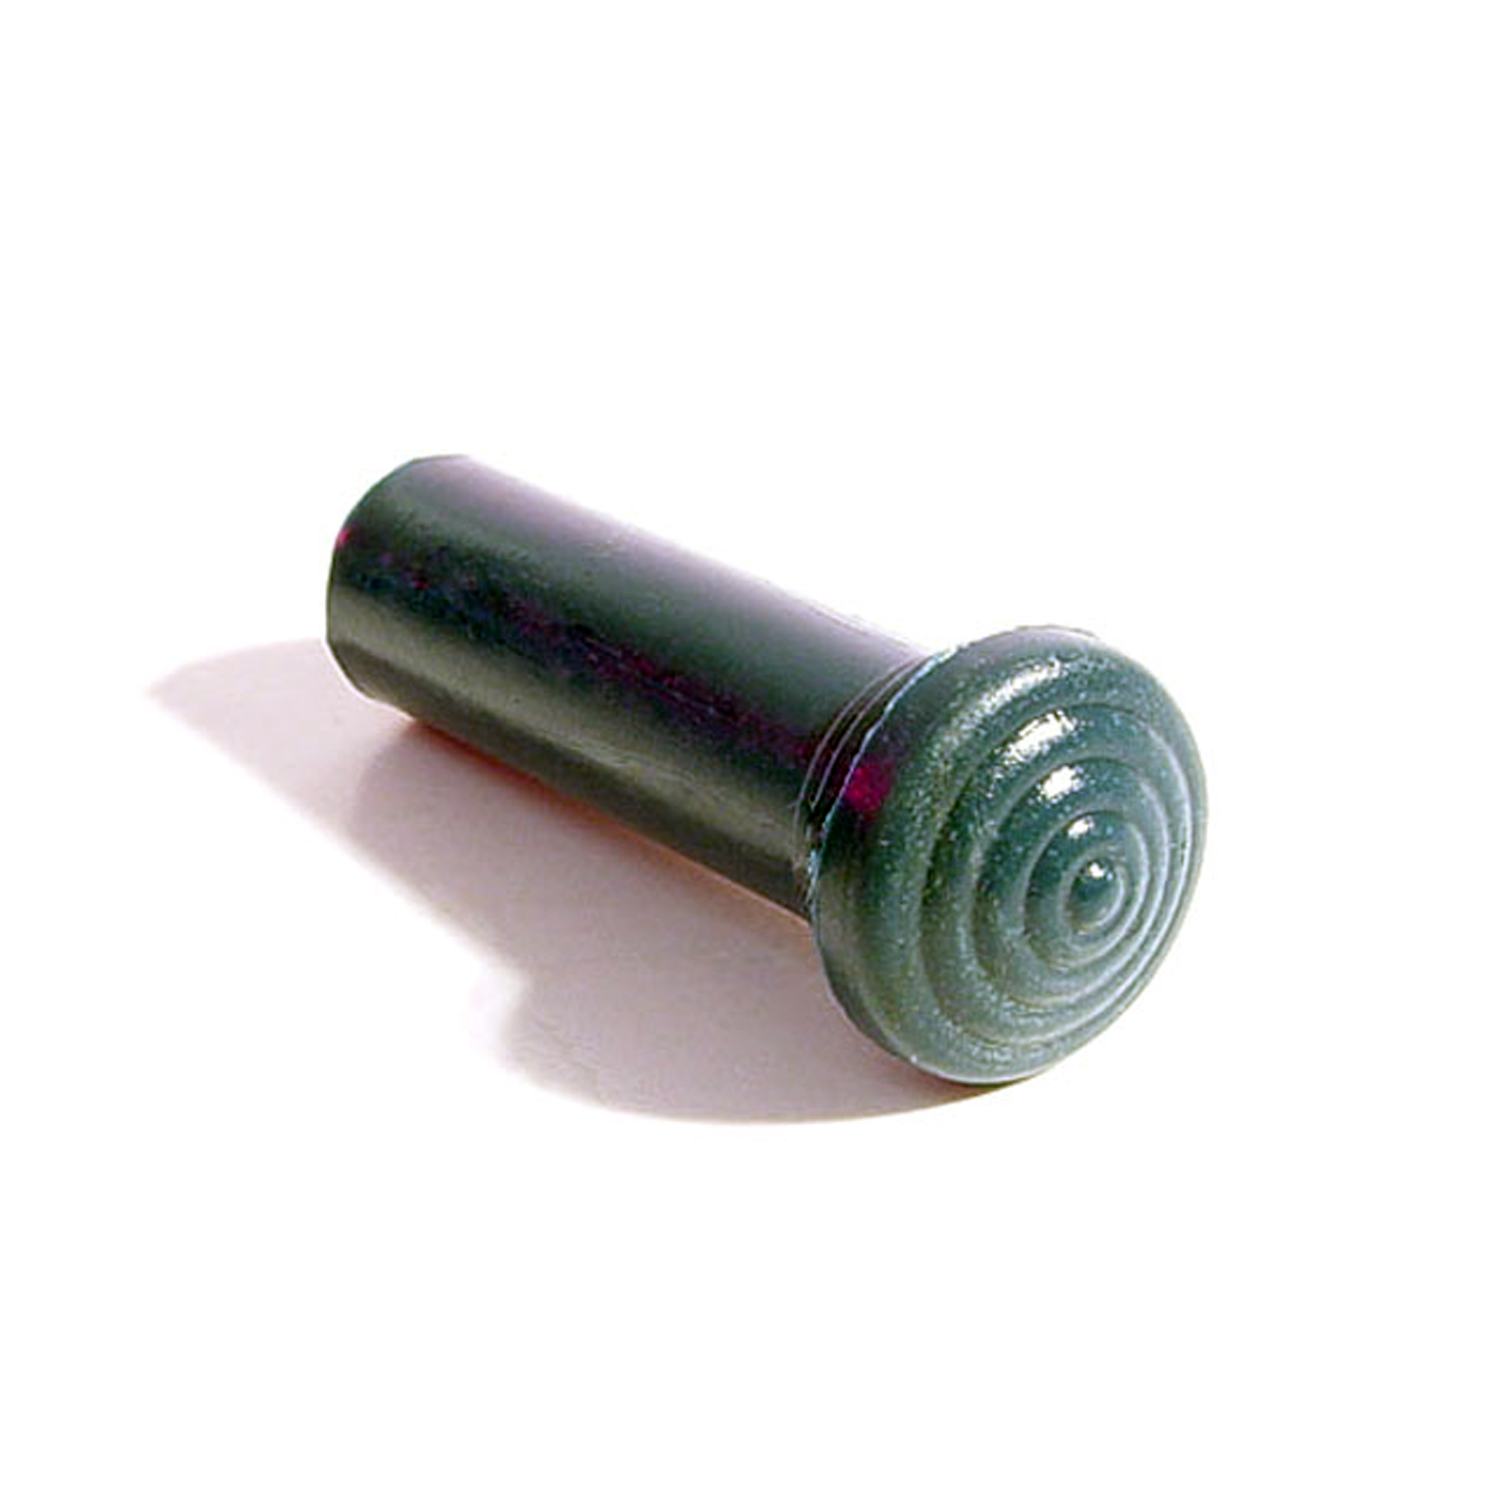 1941 Buick Super Series 50 Door Lock Knob.  Made of Wedgwood rubber, self-threading-RP 304-L